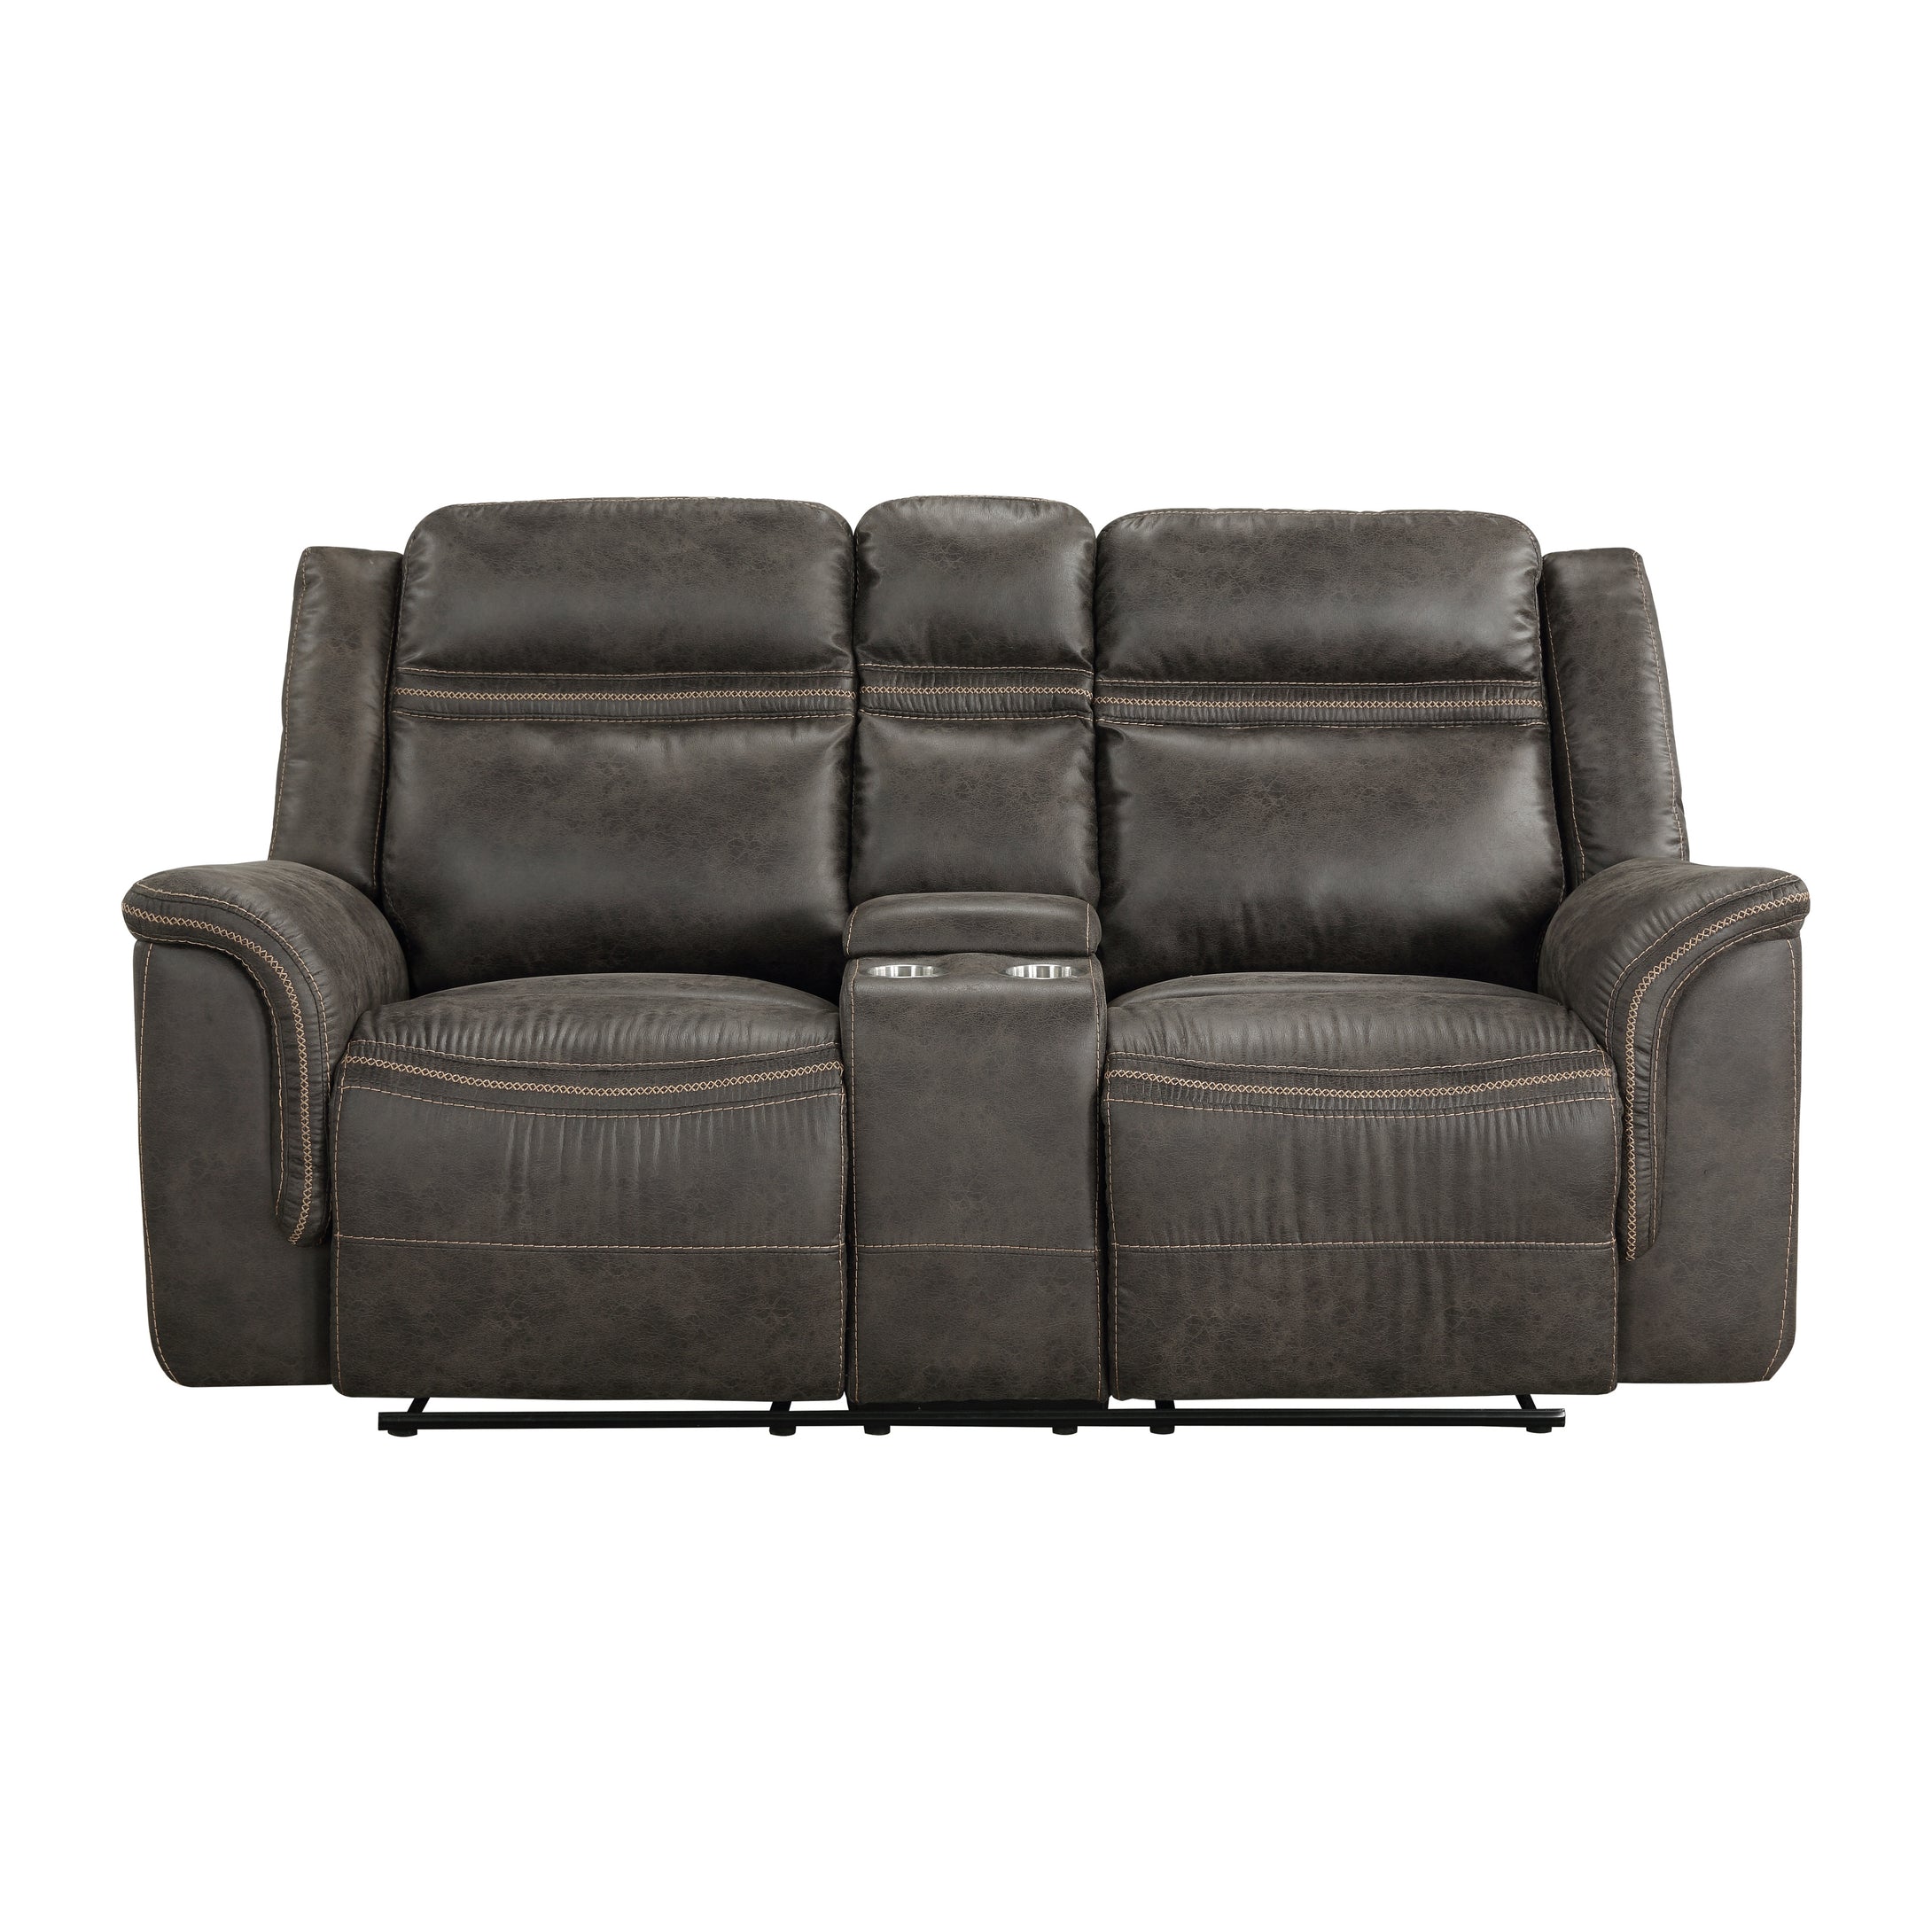 9426-2 Double Reclining Love Seat with Center Console